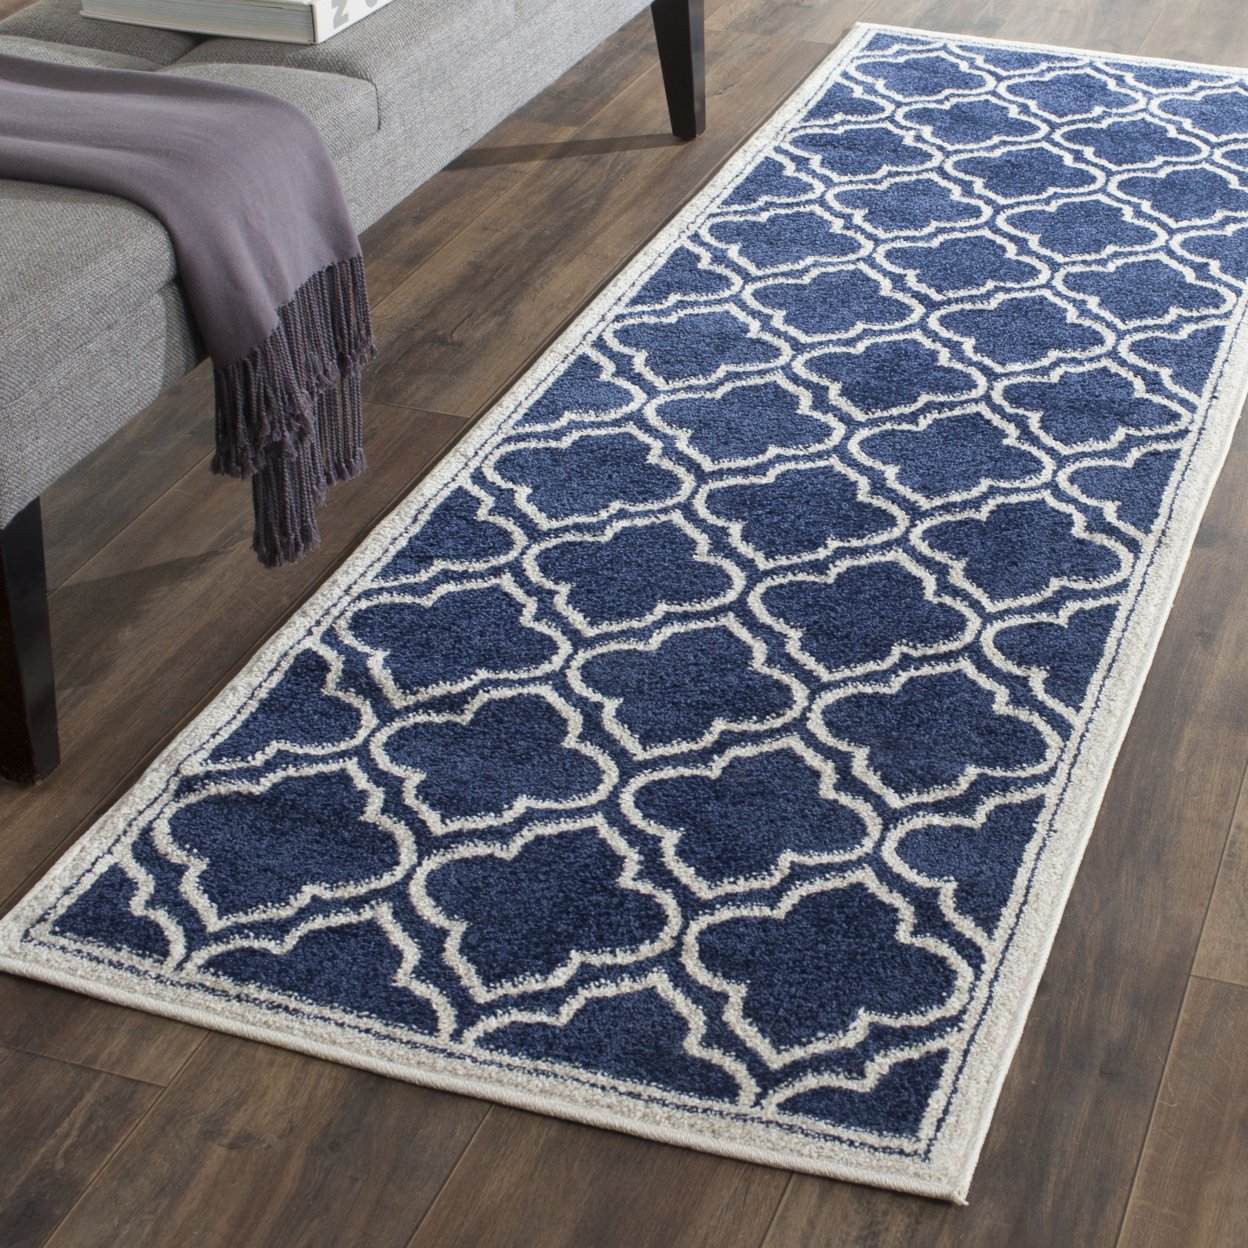 SAFAVIEH Amherst Collection AMT412P Navy / Ivory Rug - 9' X 12'